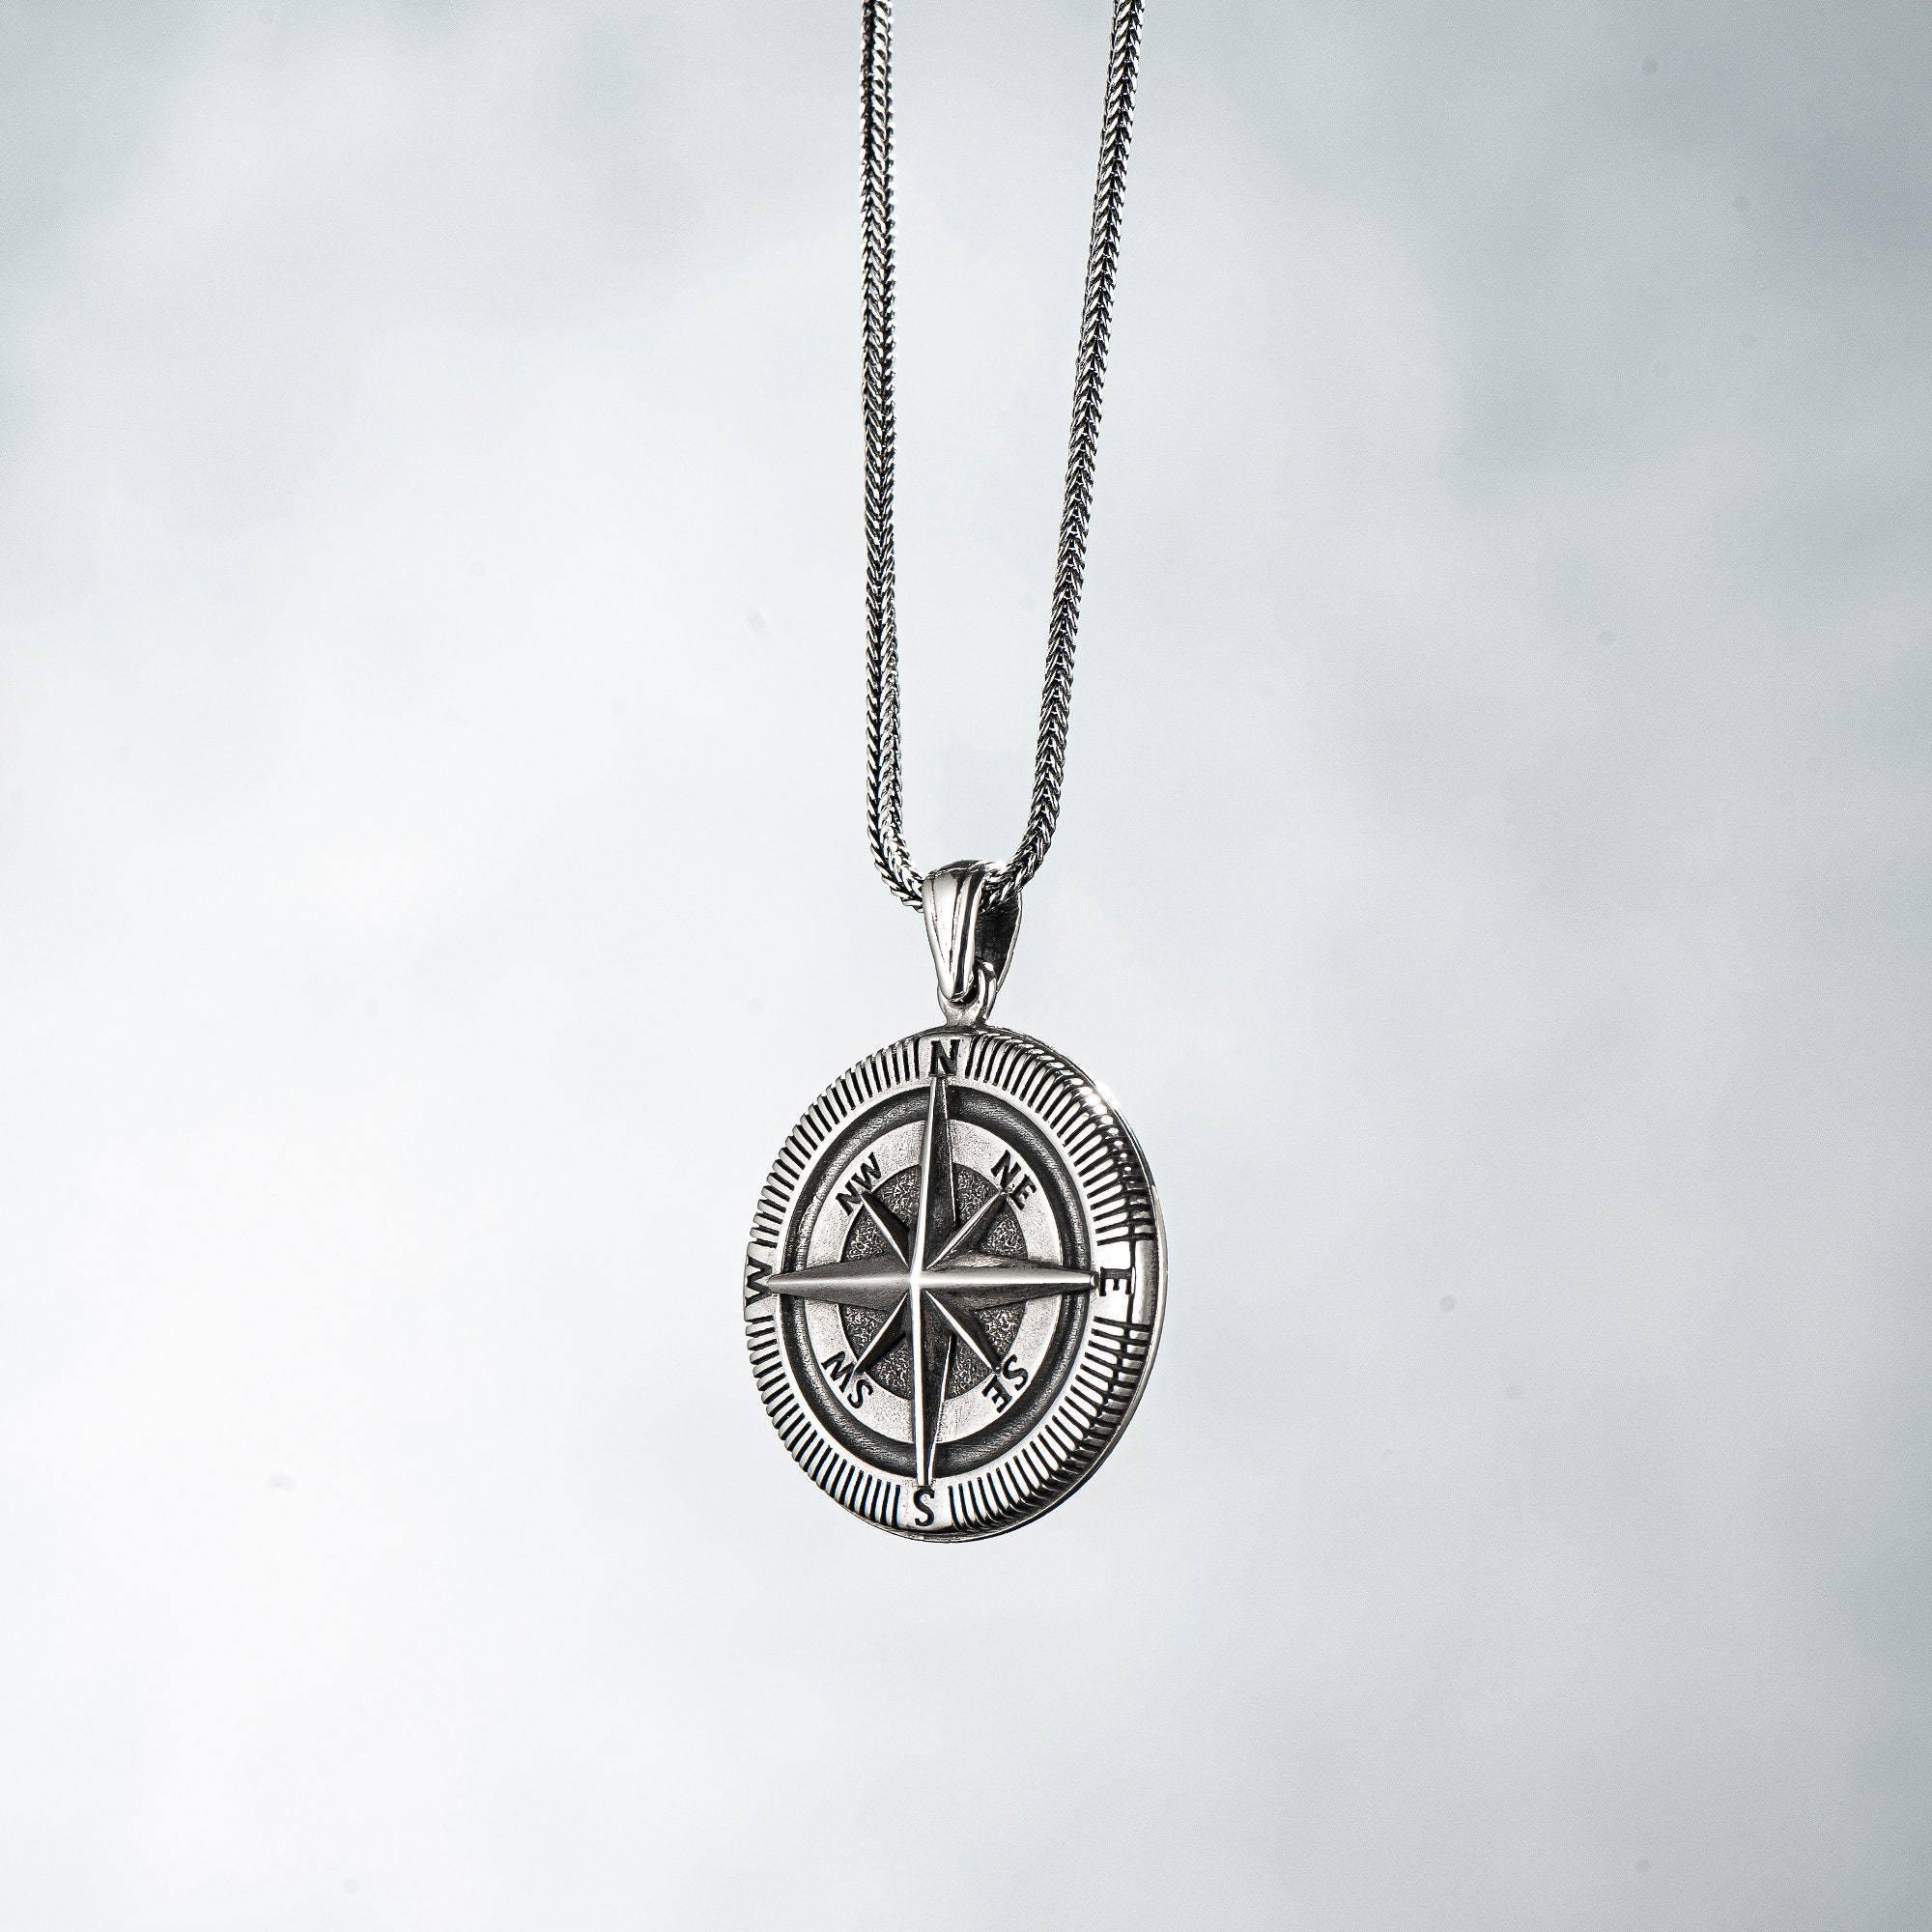 Personalized 925k Silver Compass Necklace - OXO SILVER